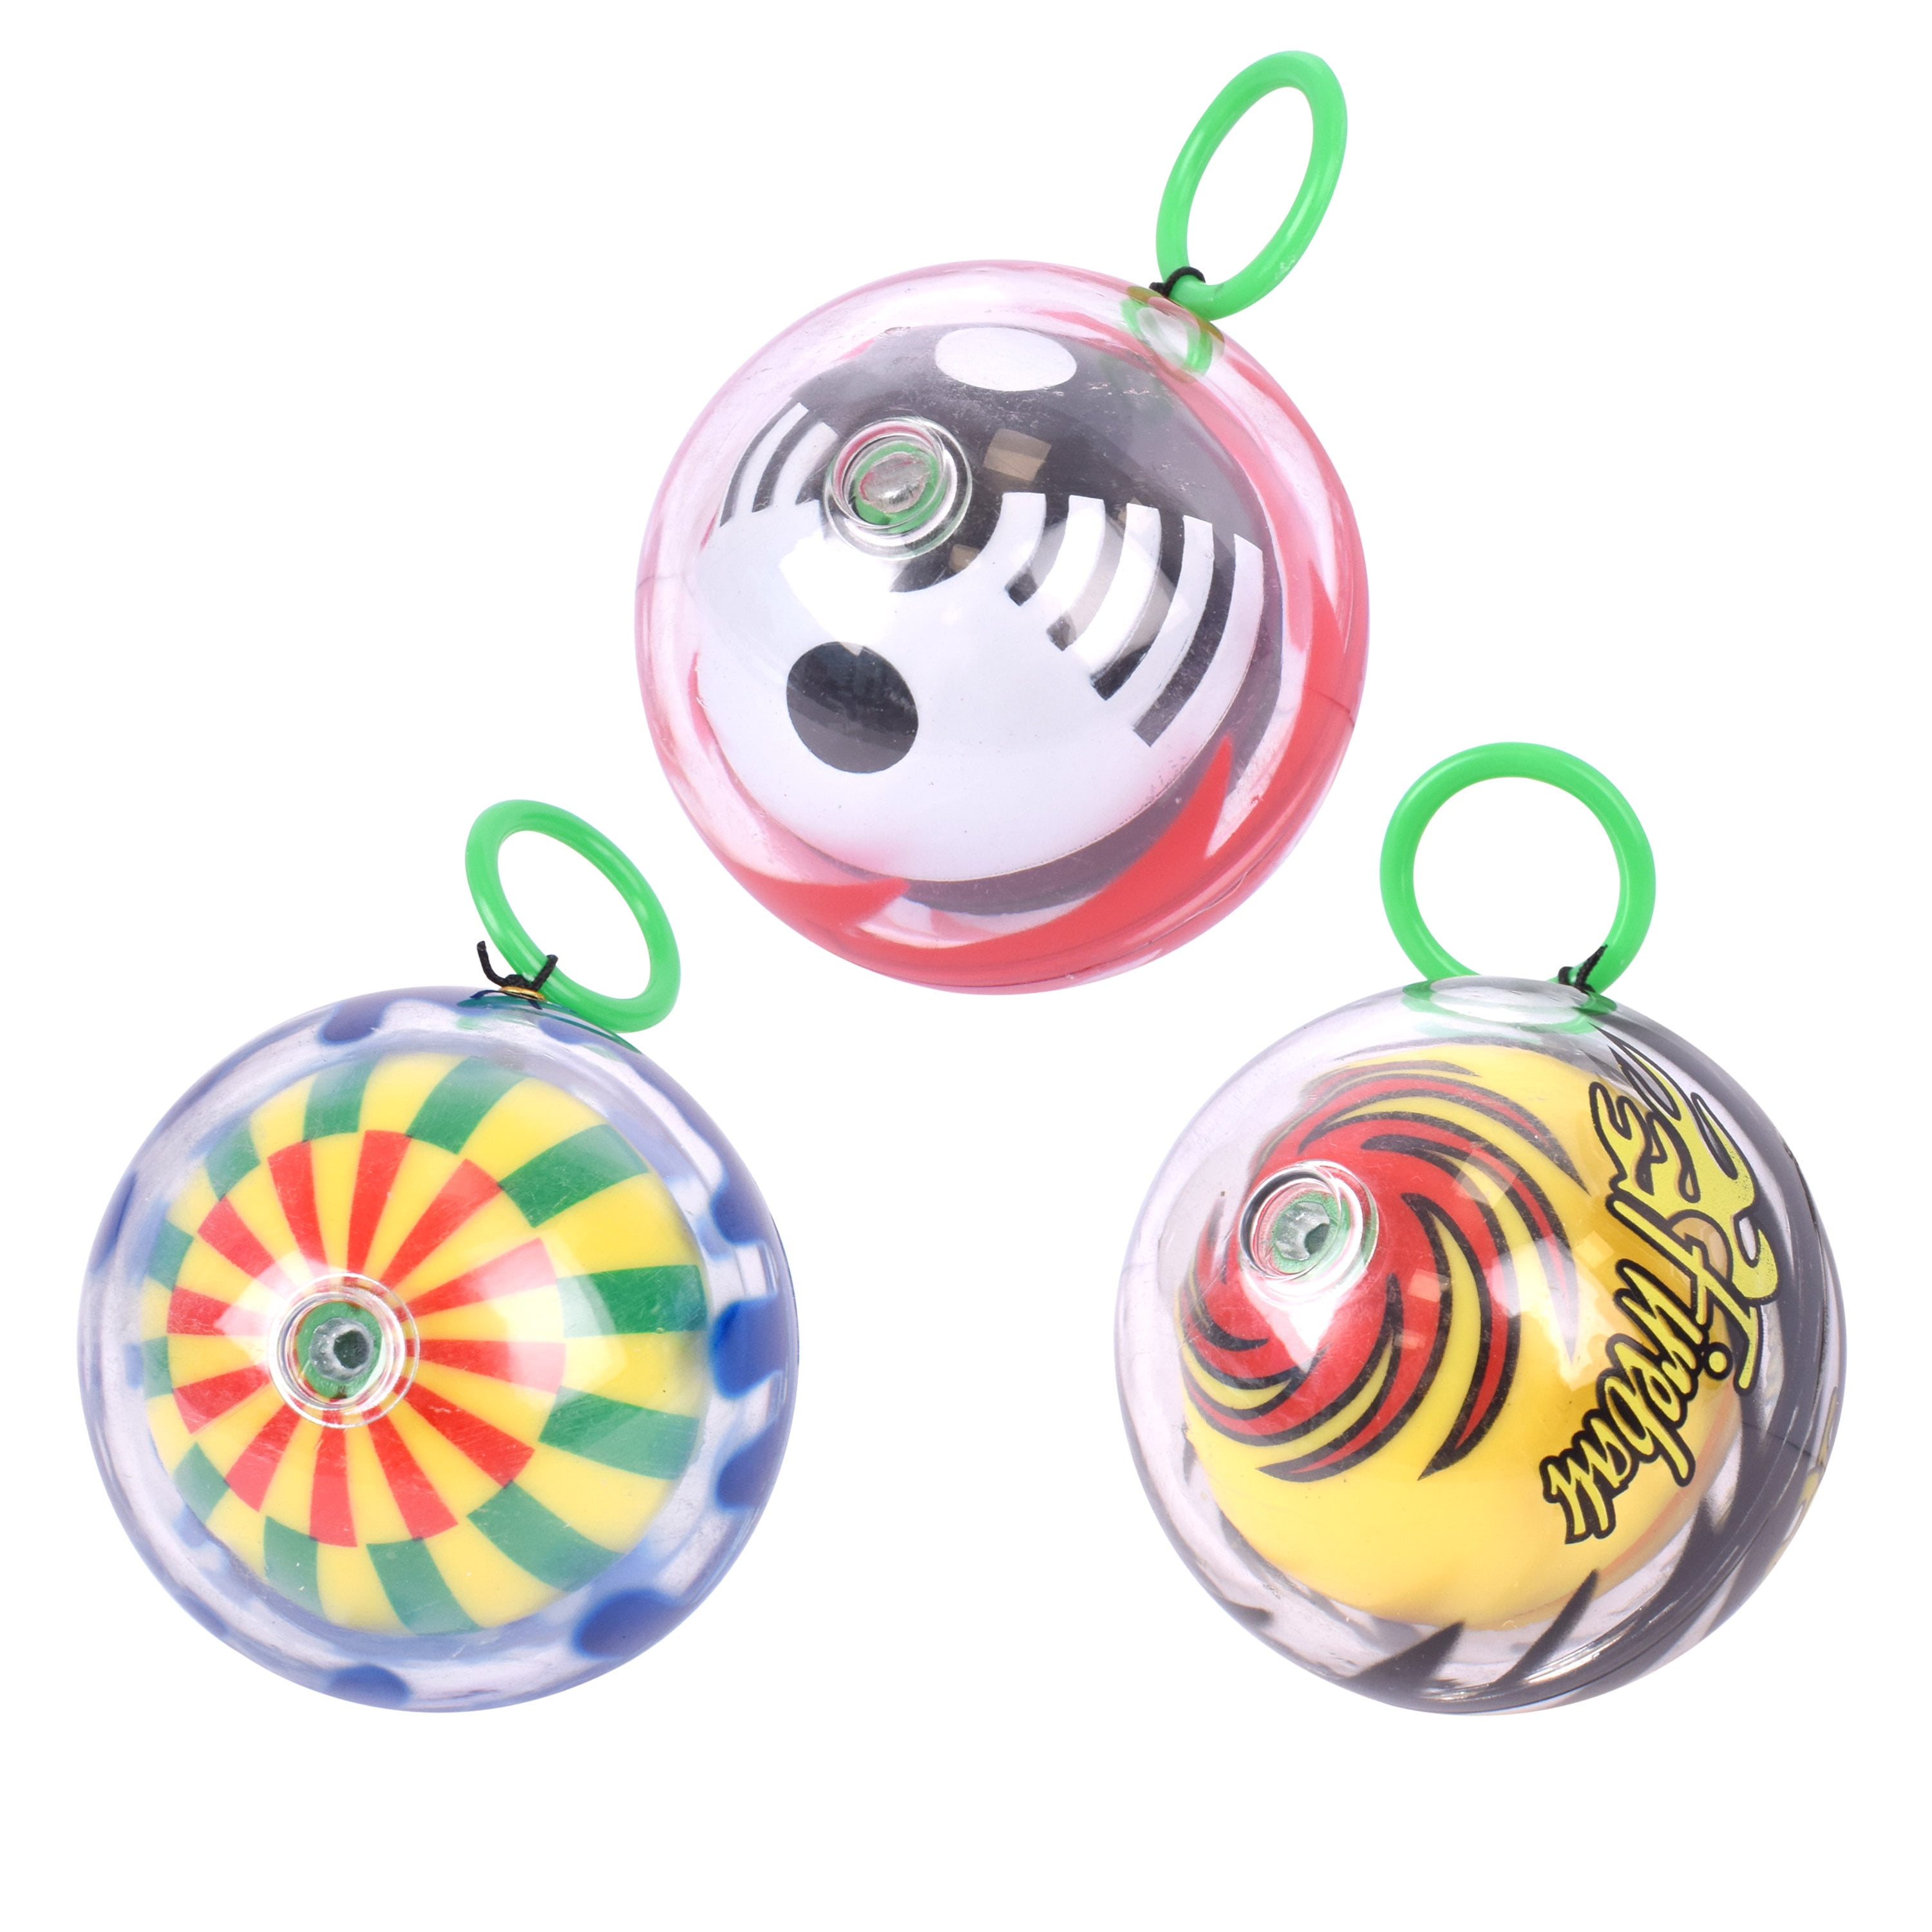 Toymendous Yo-Yo Pro, 1 Count, Multi-Color, Designs May Very - Children to  Adult, Unisex Ages 3+ 